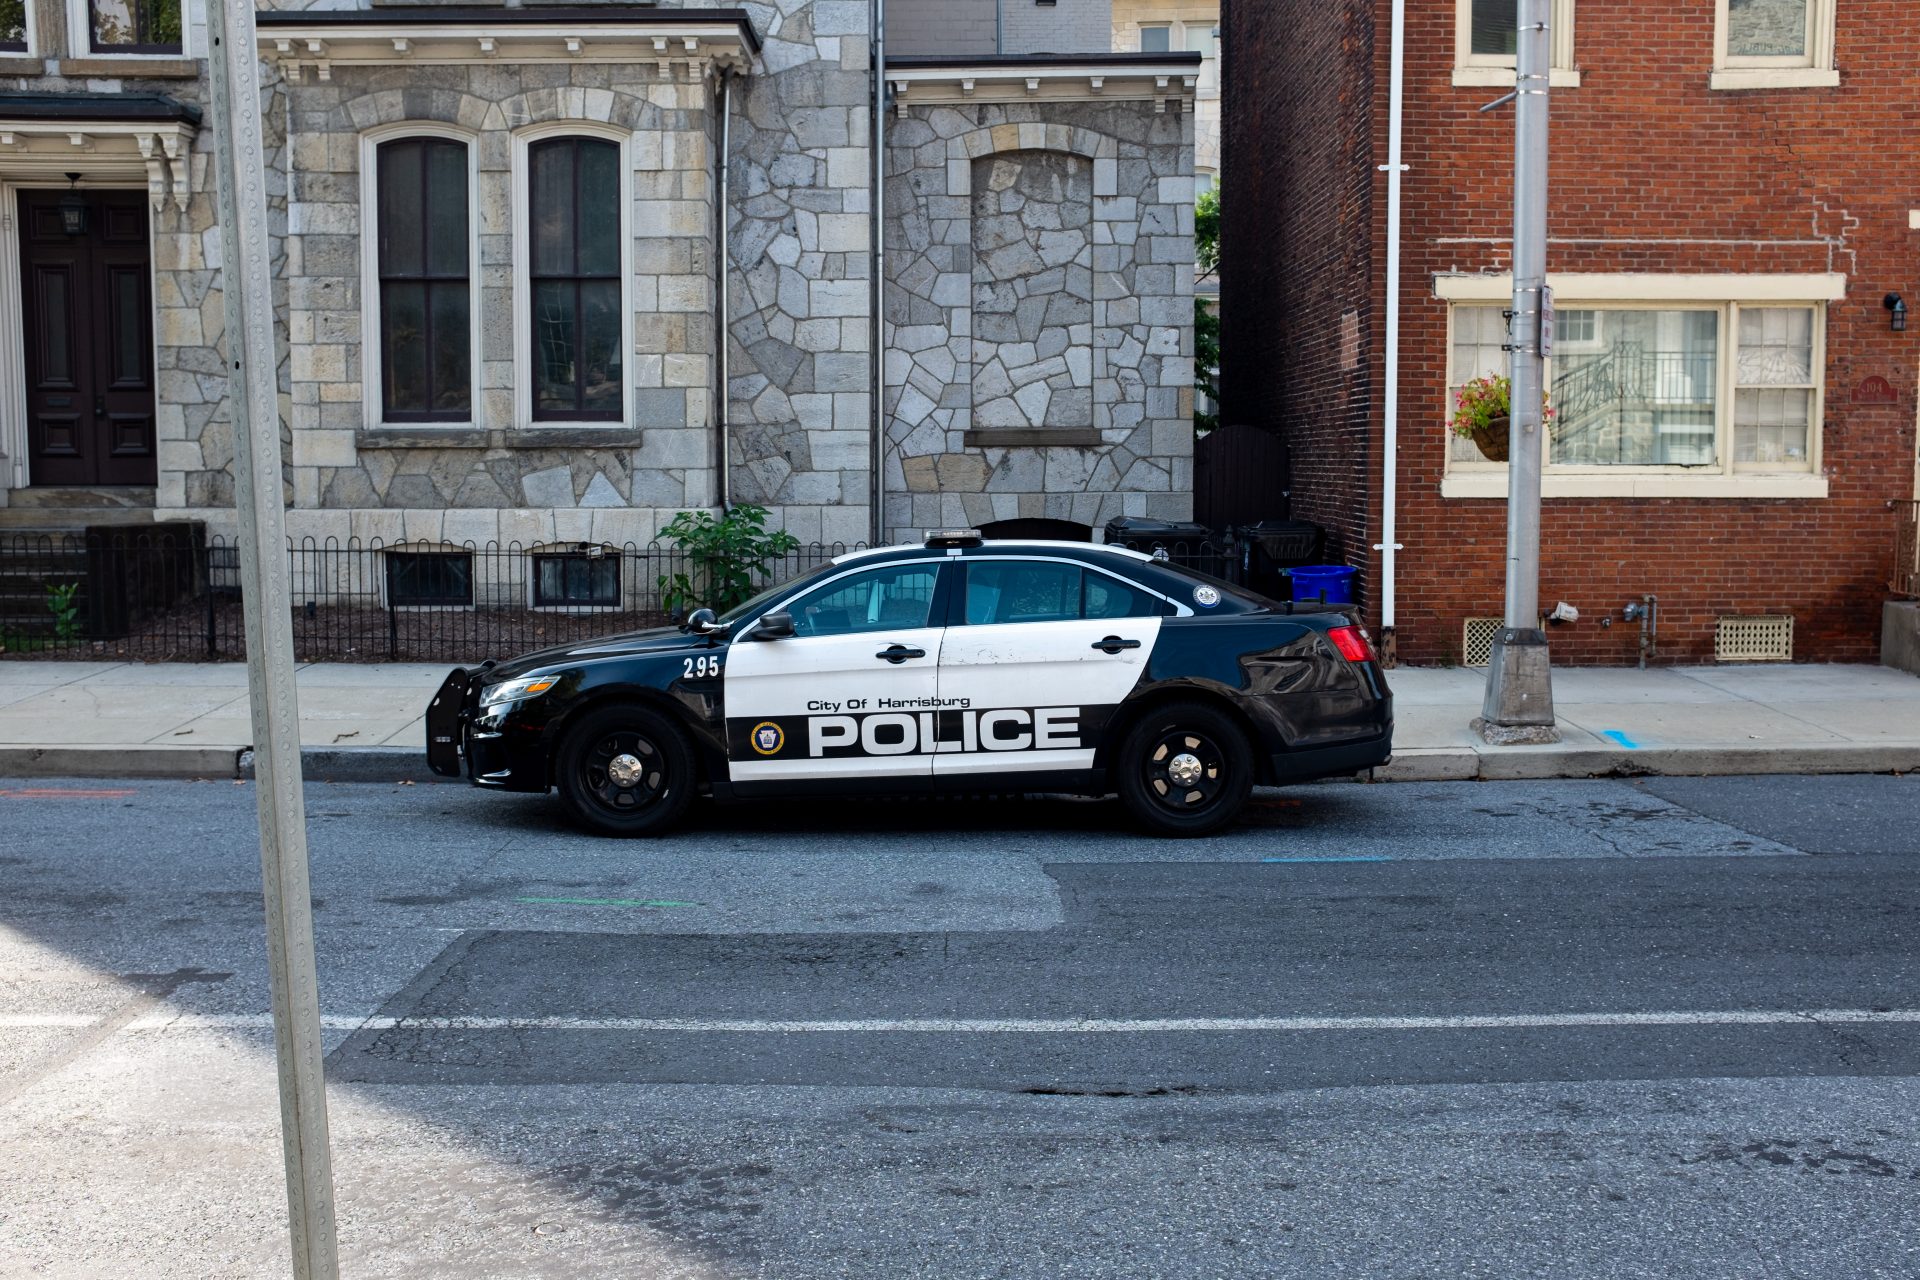 A Harrisburg Police car is seen on the street in Harrisburg on Aug. 19, 2019.